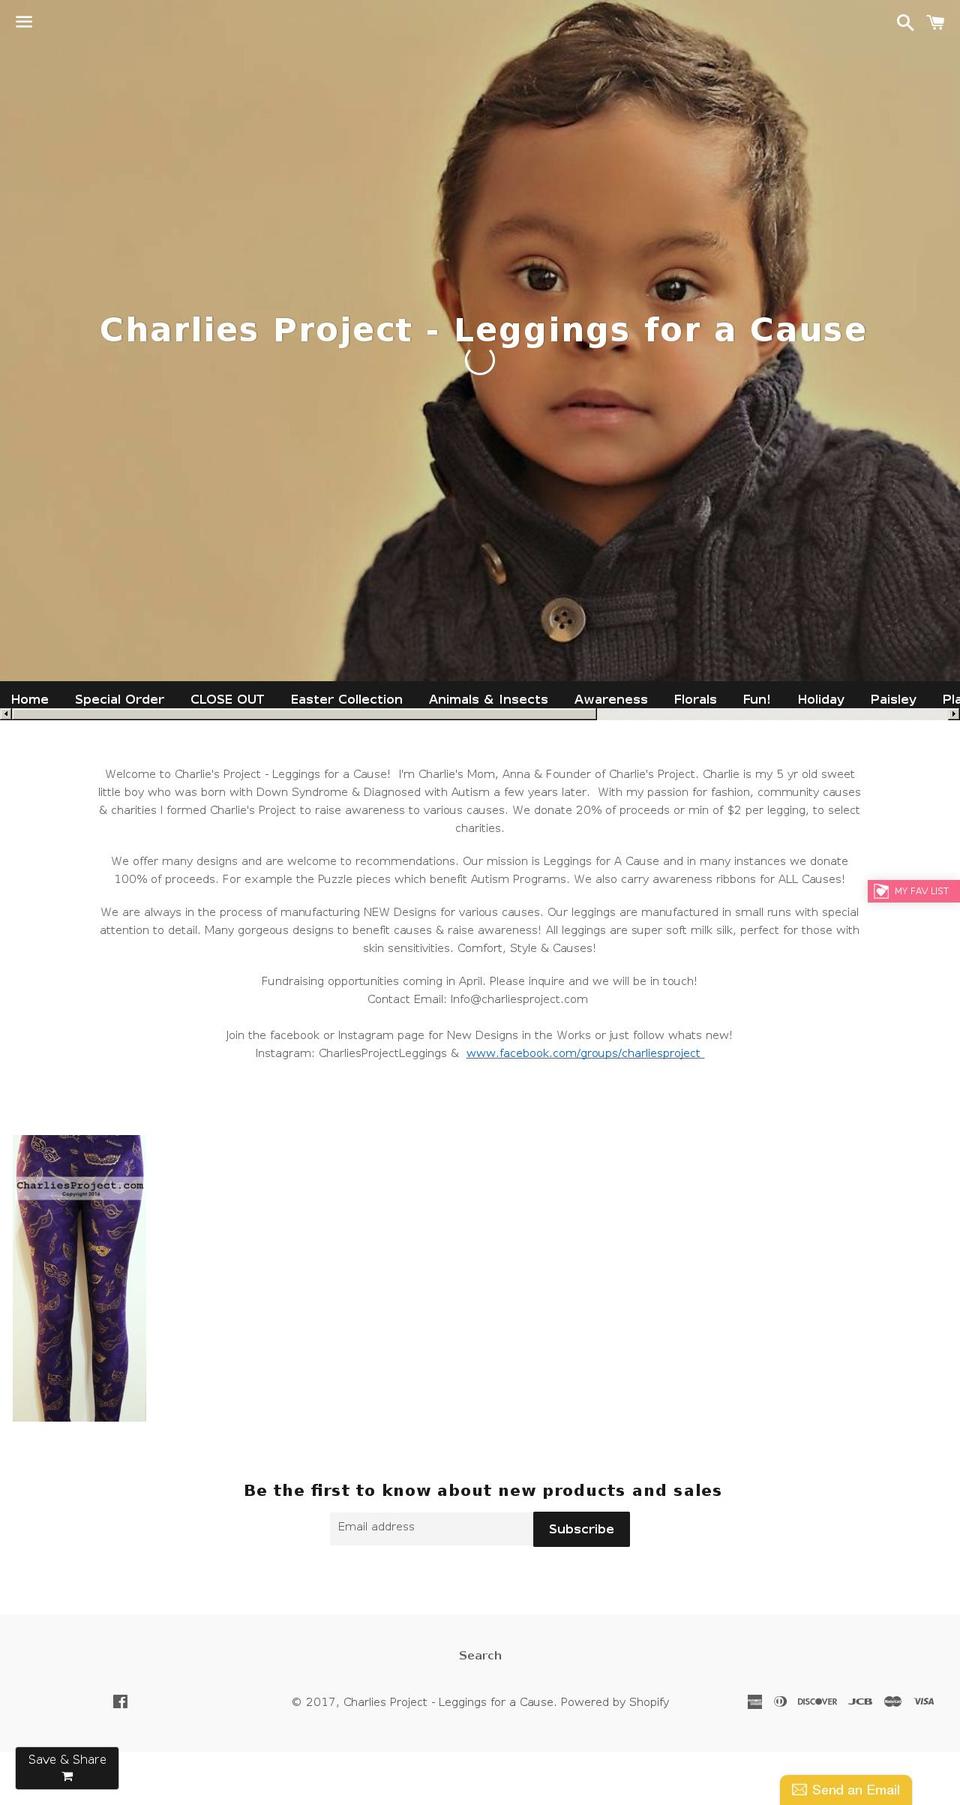 charlies-project-leggings-for-a-cause.myshopify.com shopify website screenshot